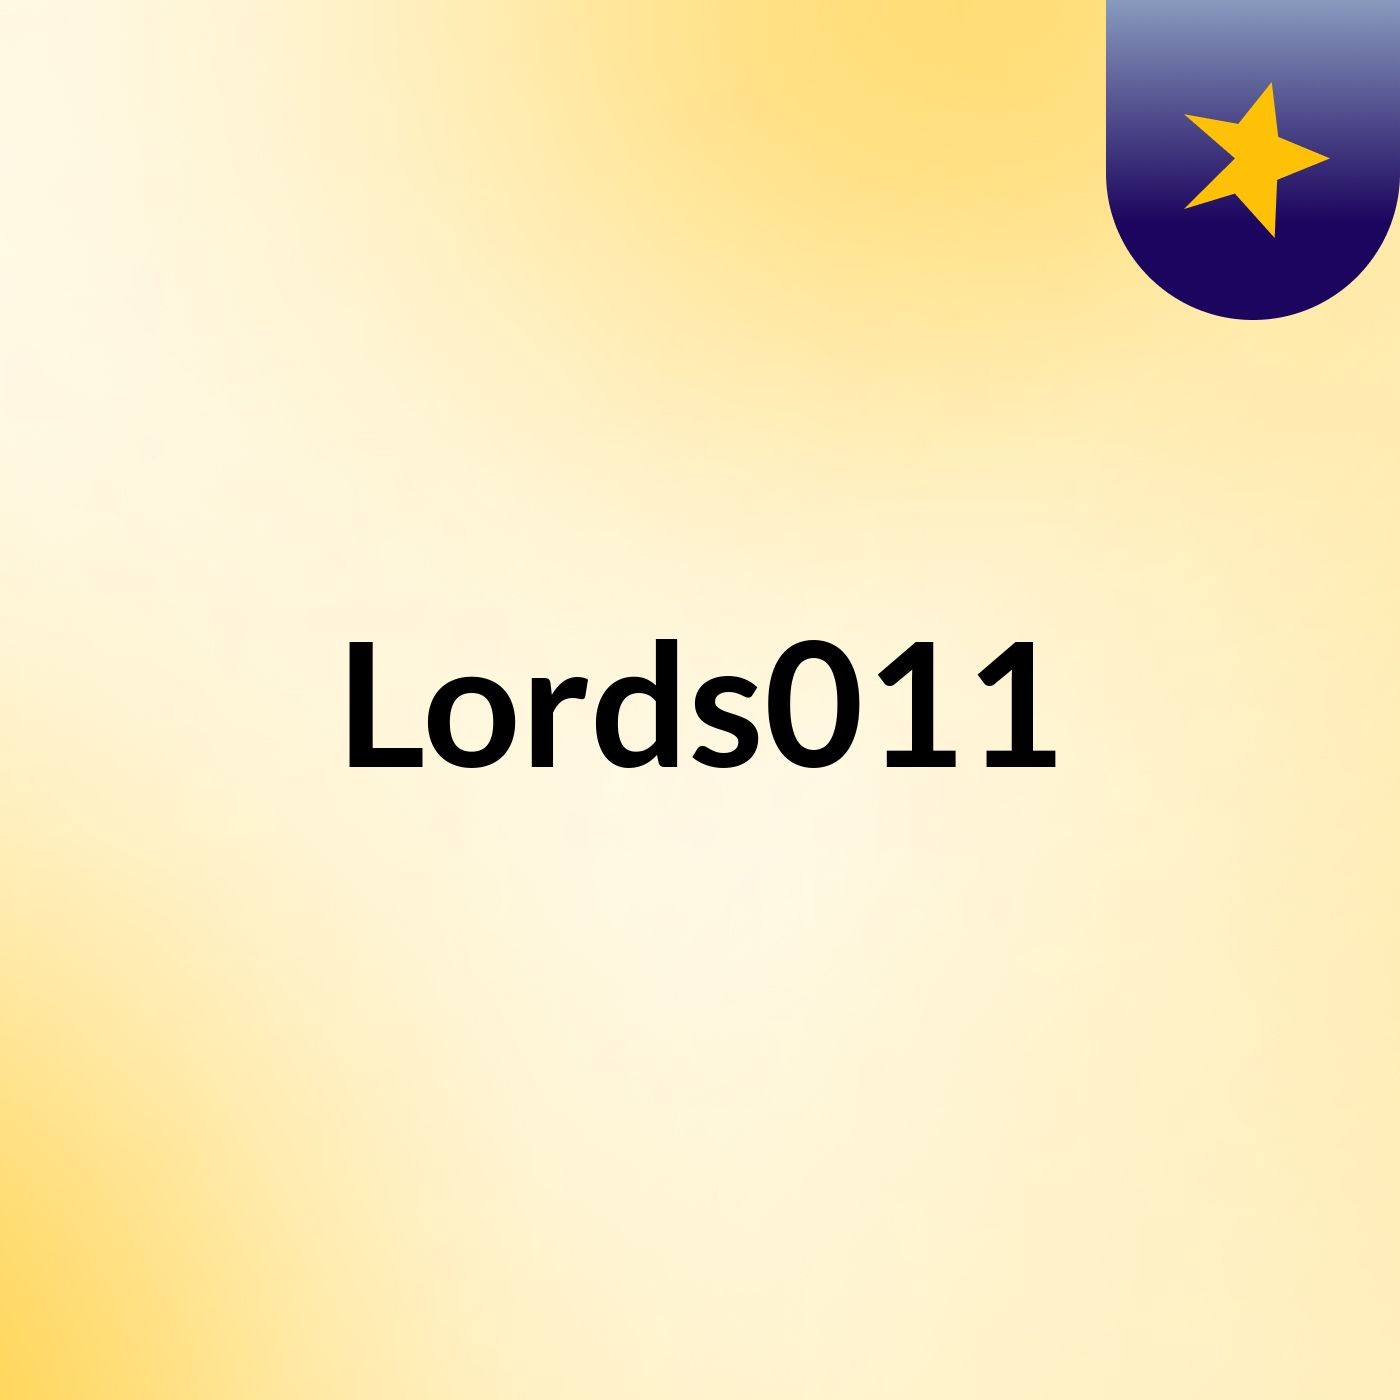 Lords011